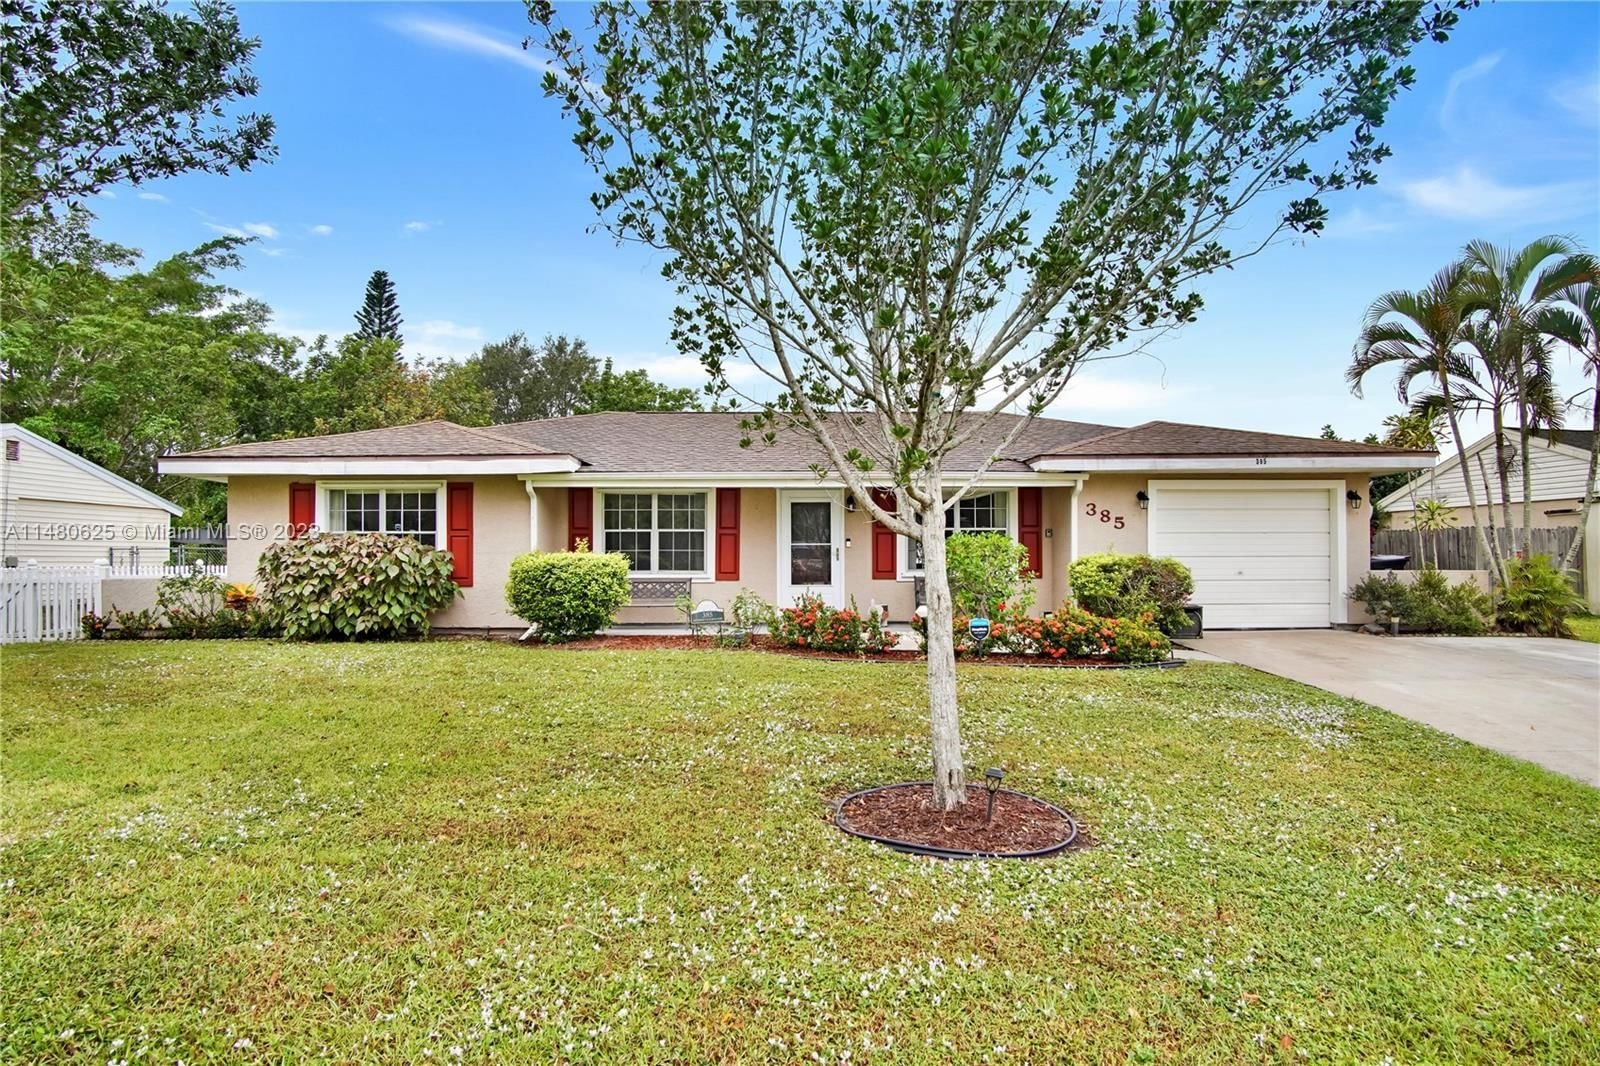 Real estate property located at 385 Tulip Blvd, St Lucie County, PORT ST LUCIE SECTION 41, Port St. Lucie, FL